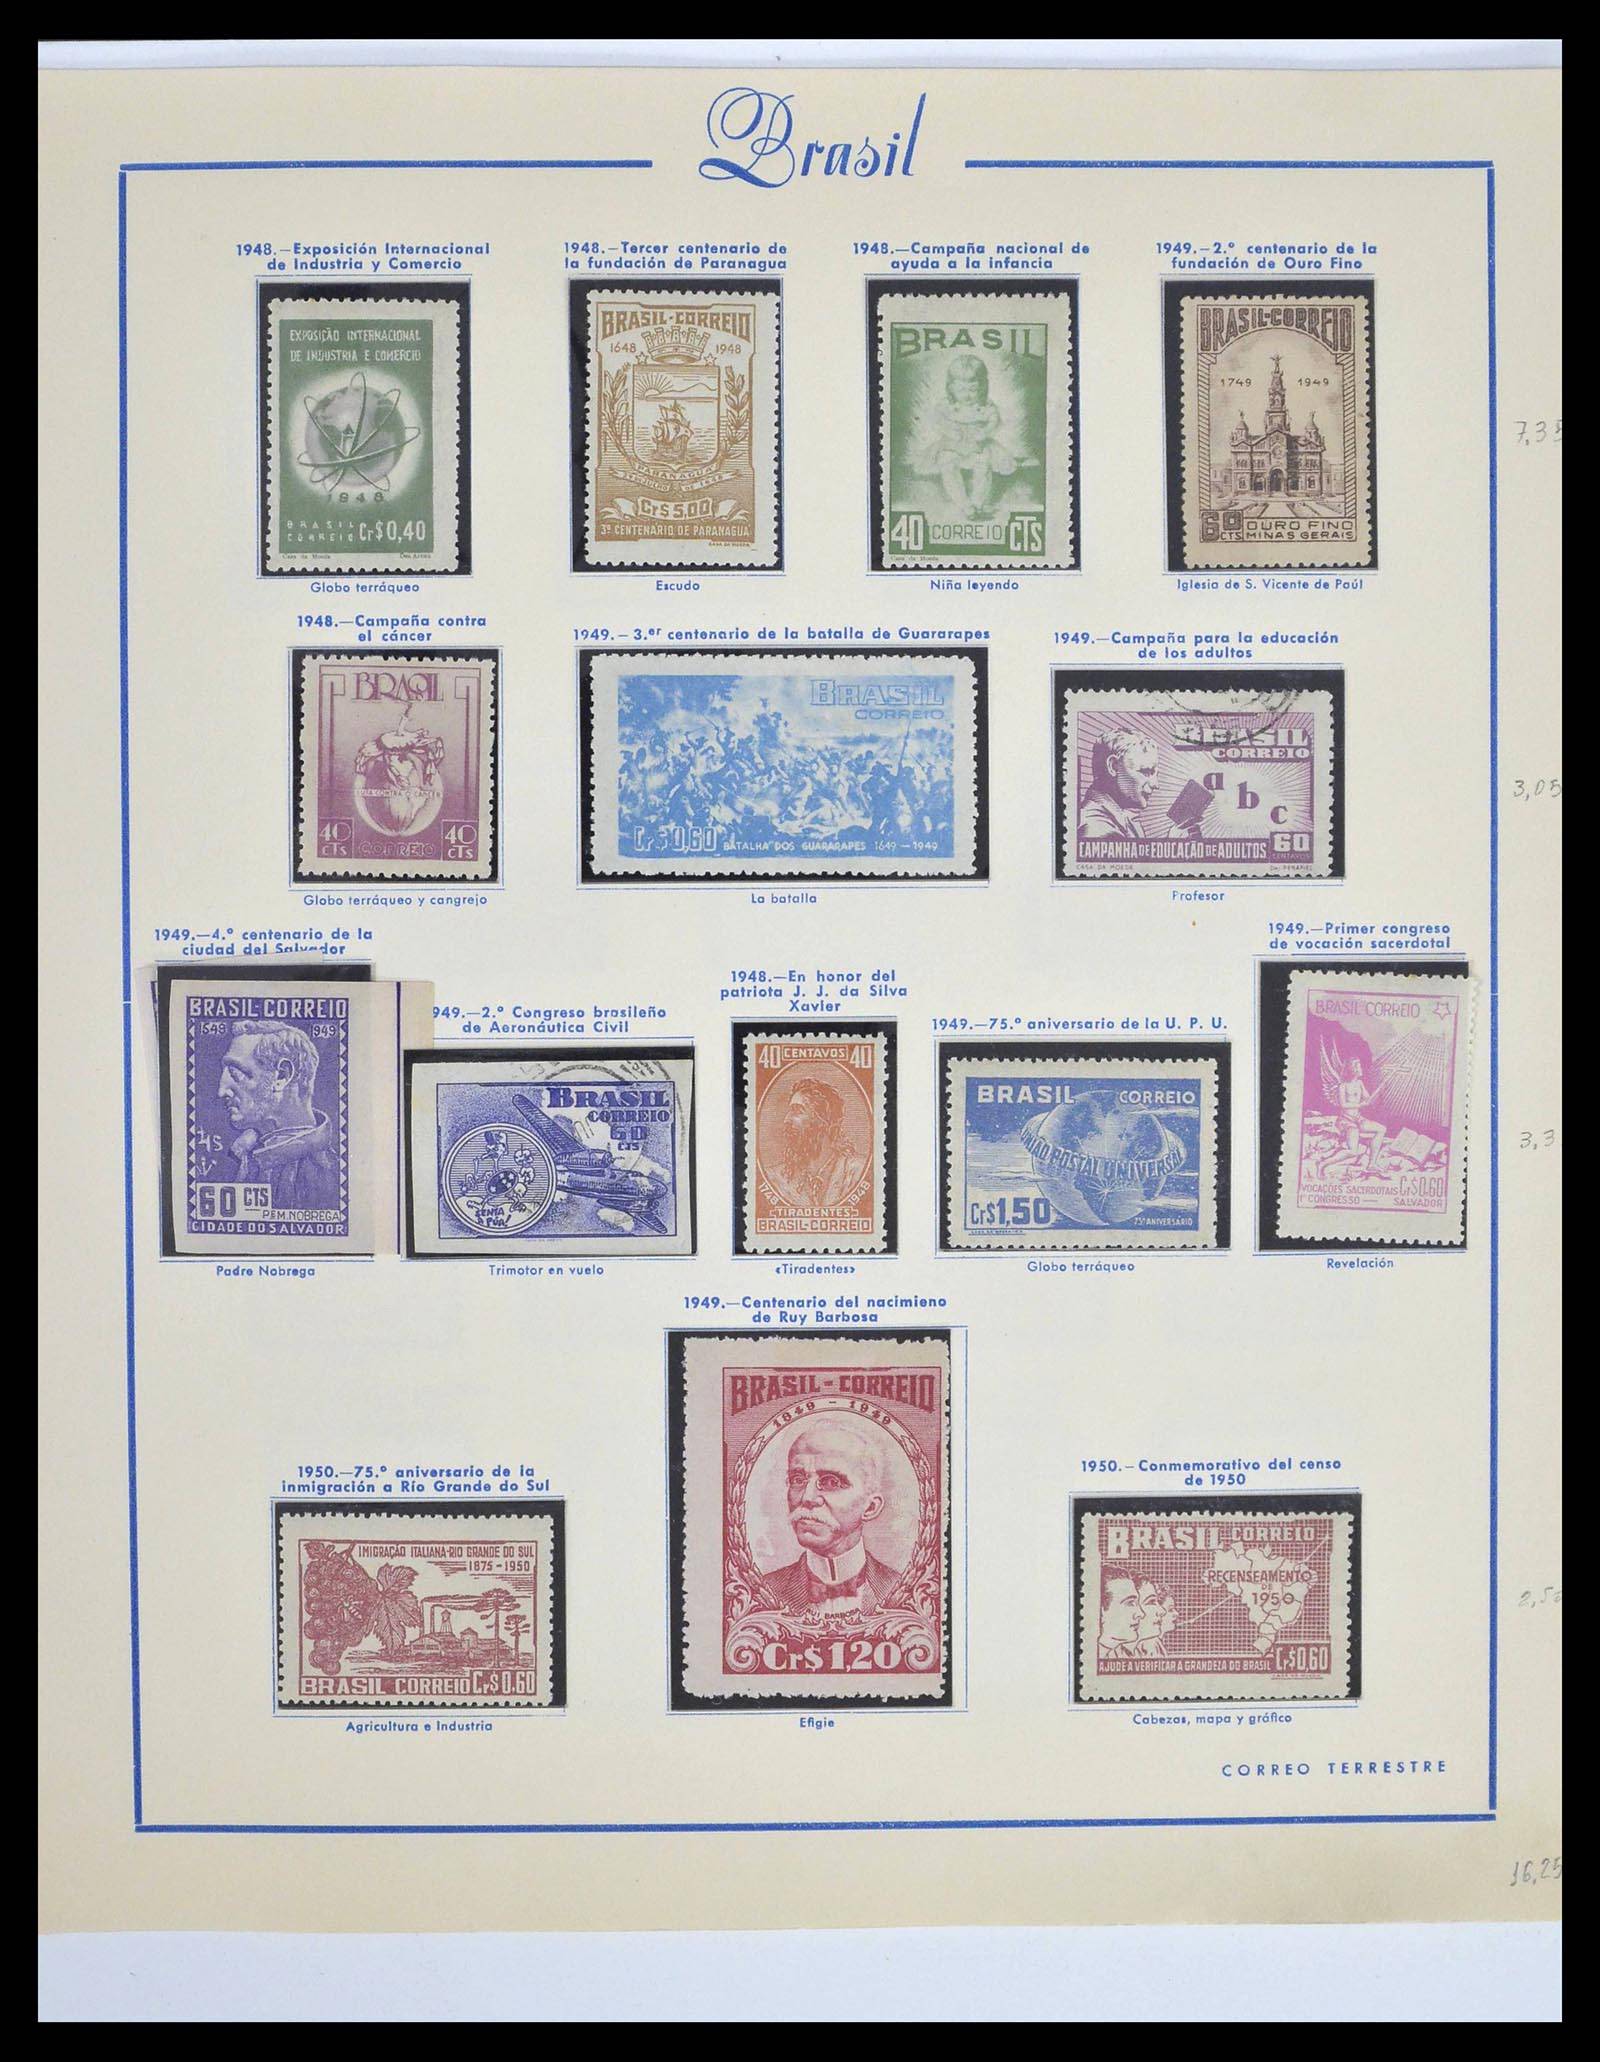 39245 0029 - Stamp collection 39245 Brazil 1843-1968.